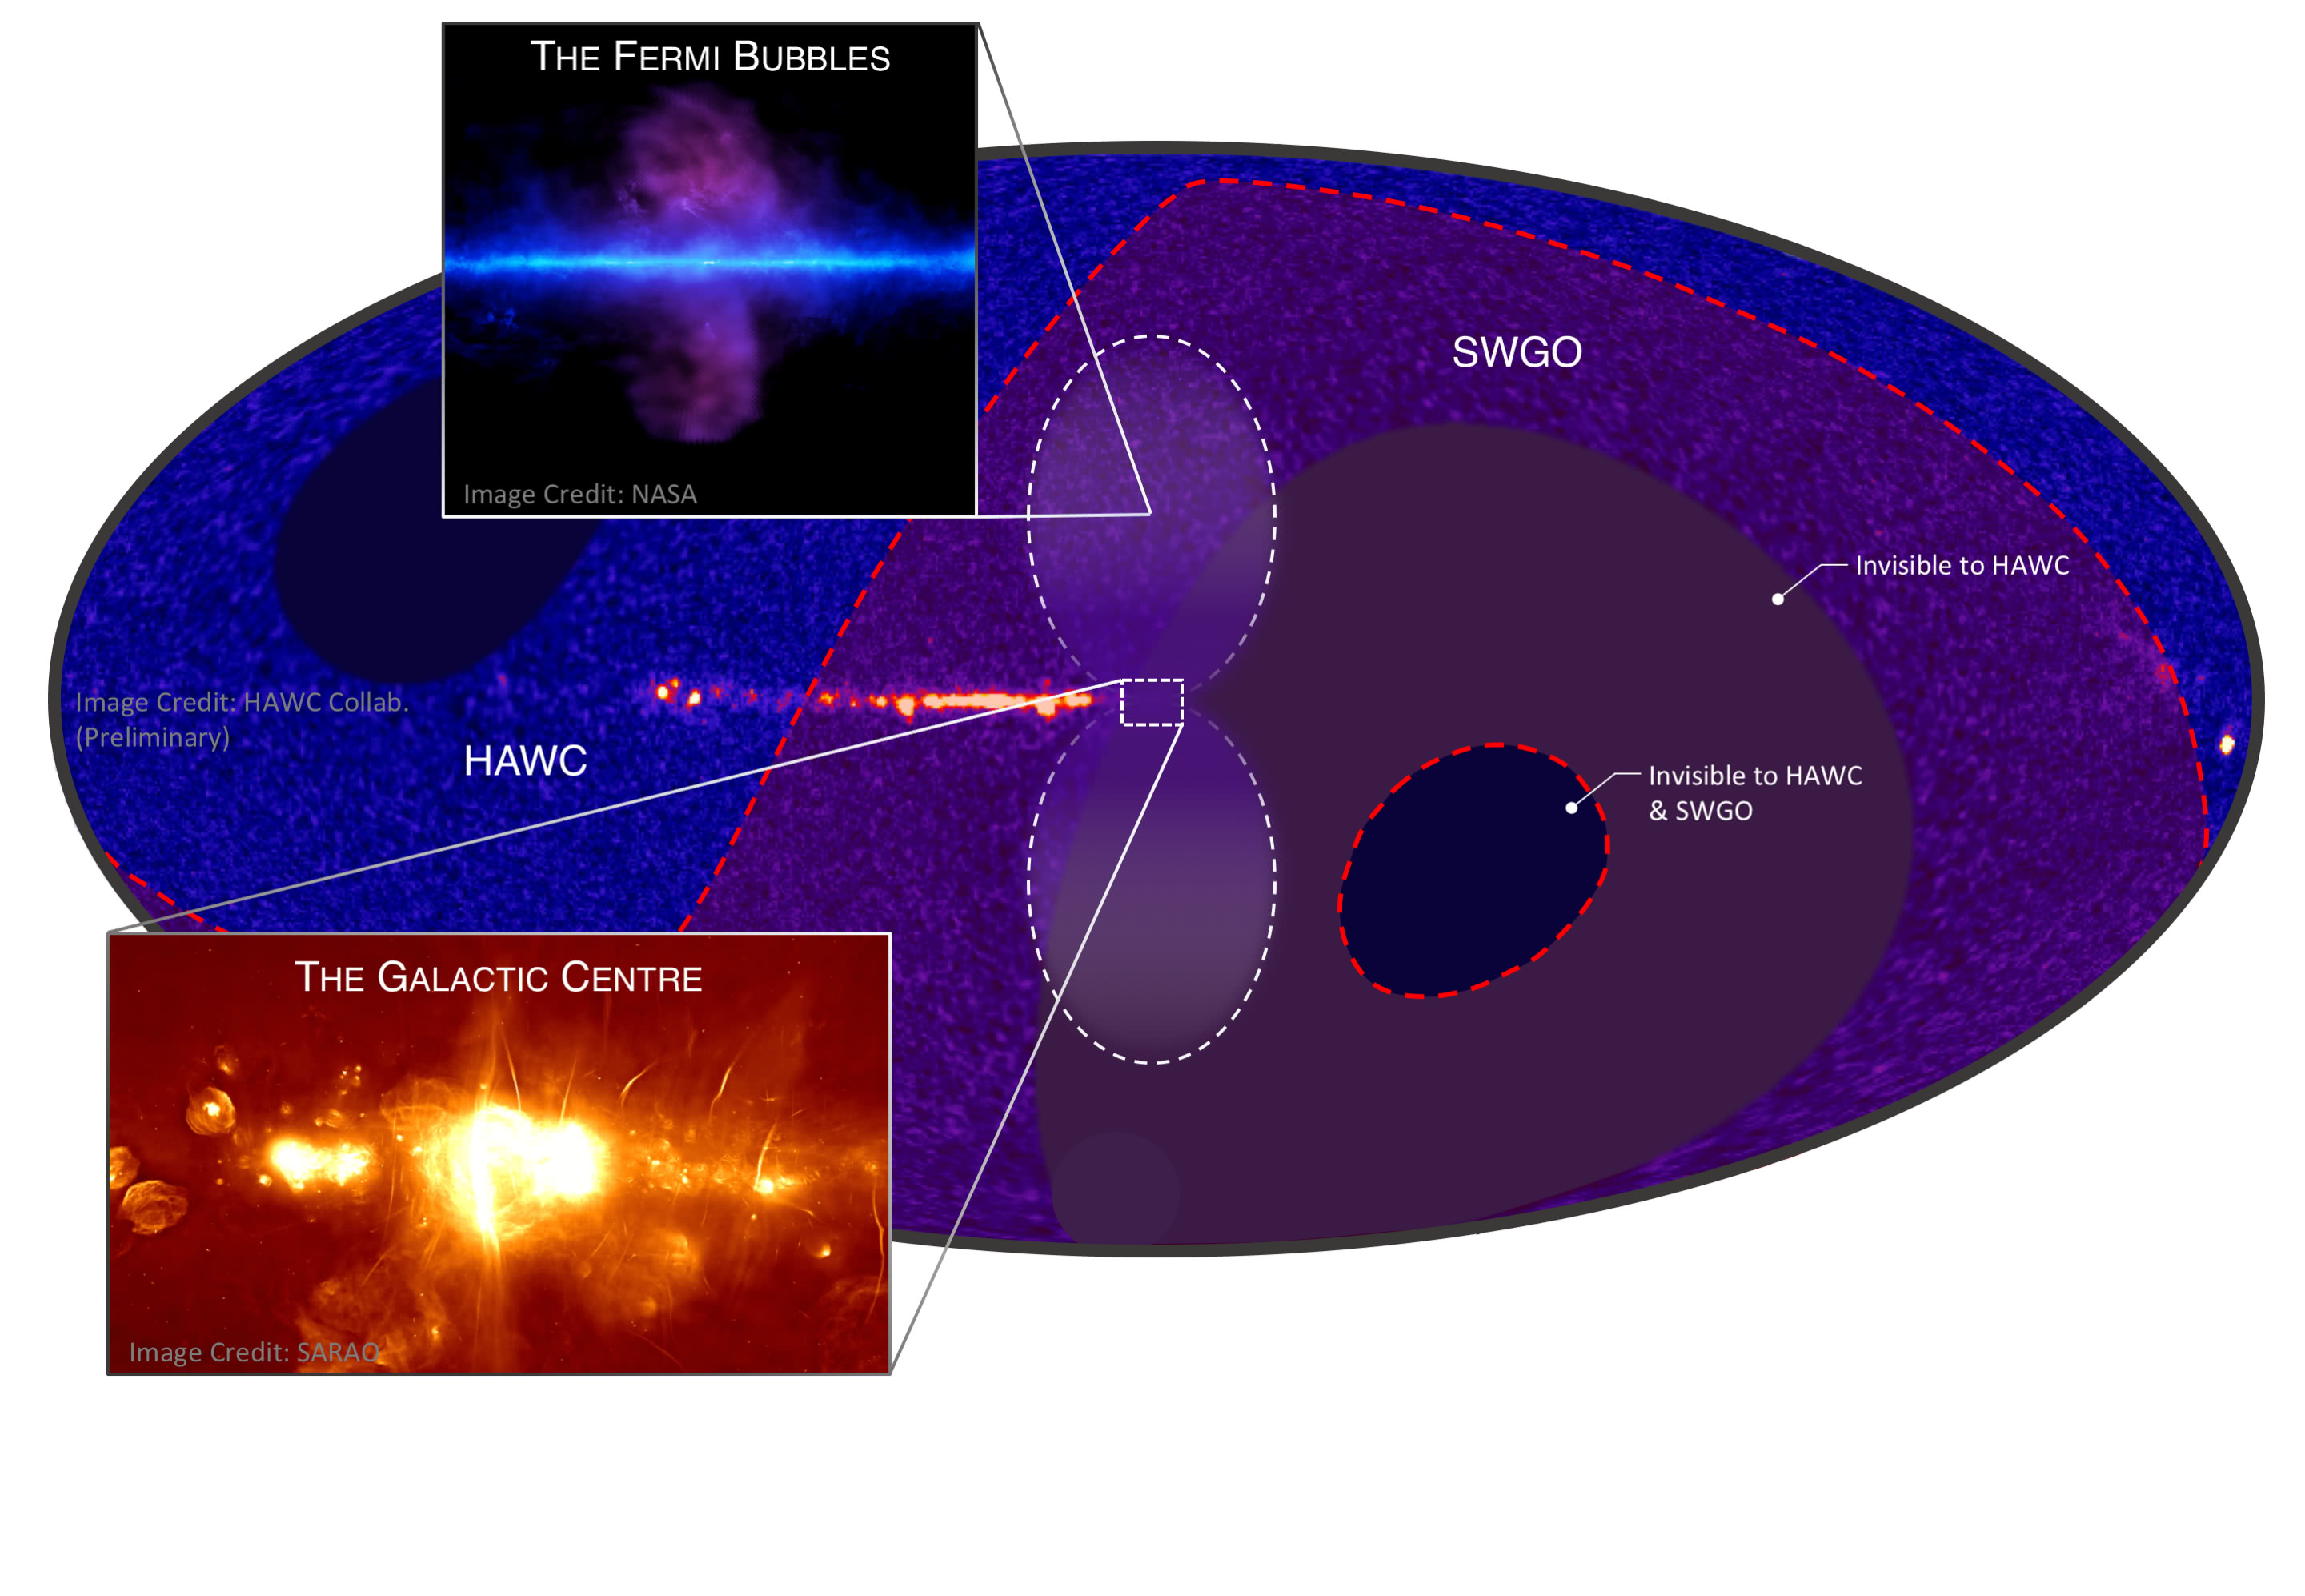 Gamma-ray sky image as seen by the (current) HAWC and (future) SWGO observatories (Credit: Richard White, MPIK)